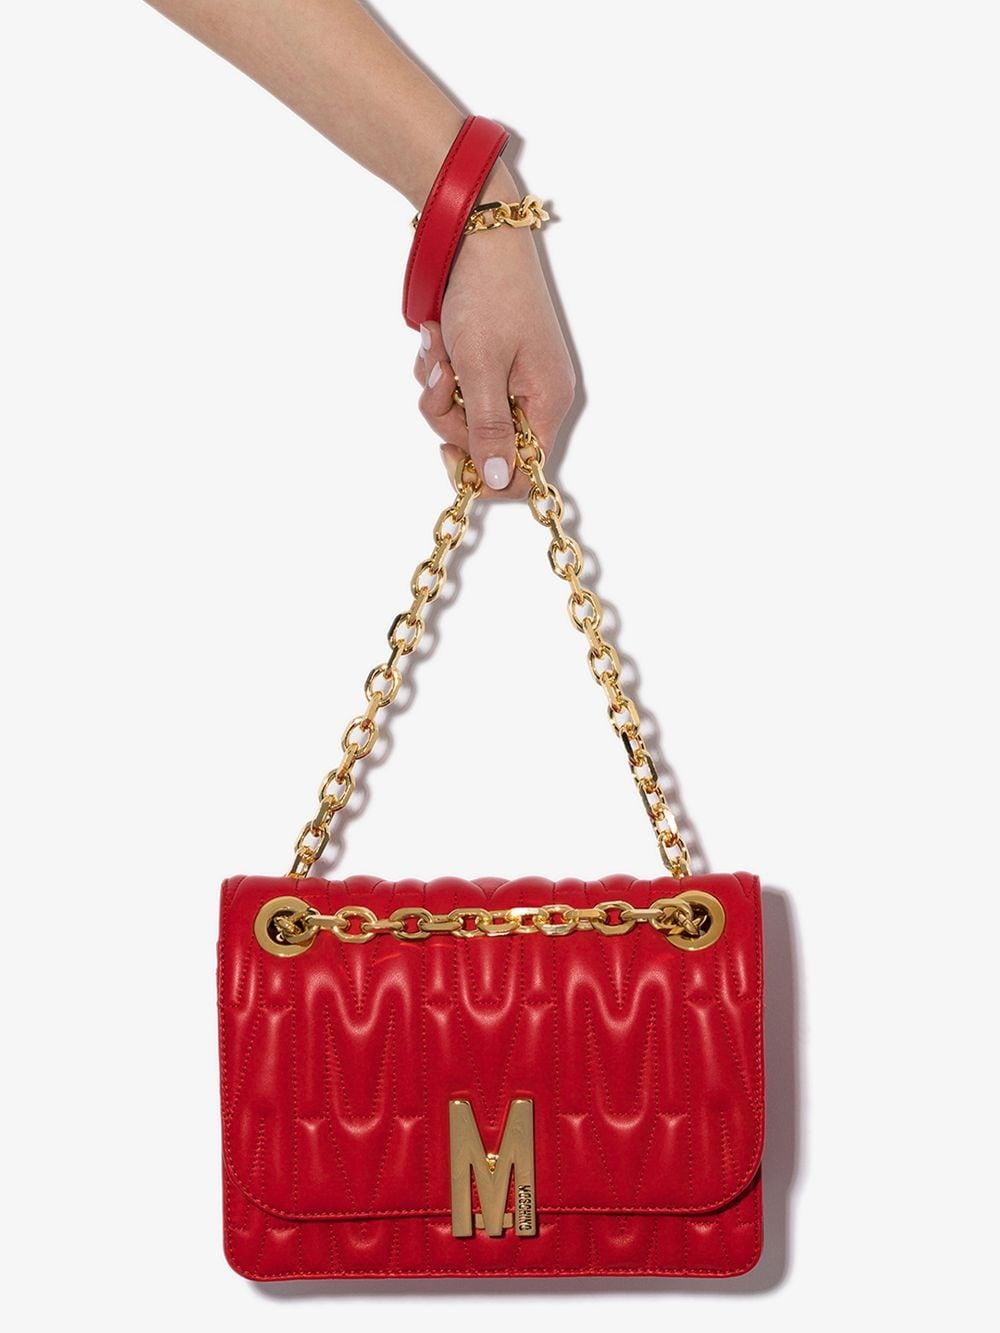 Moschino Leather Monogram-quilted Shoulder Bag in Red | Lyst